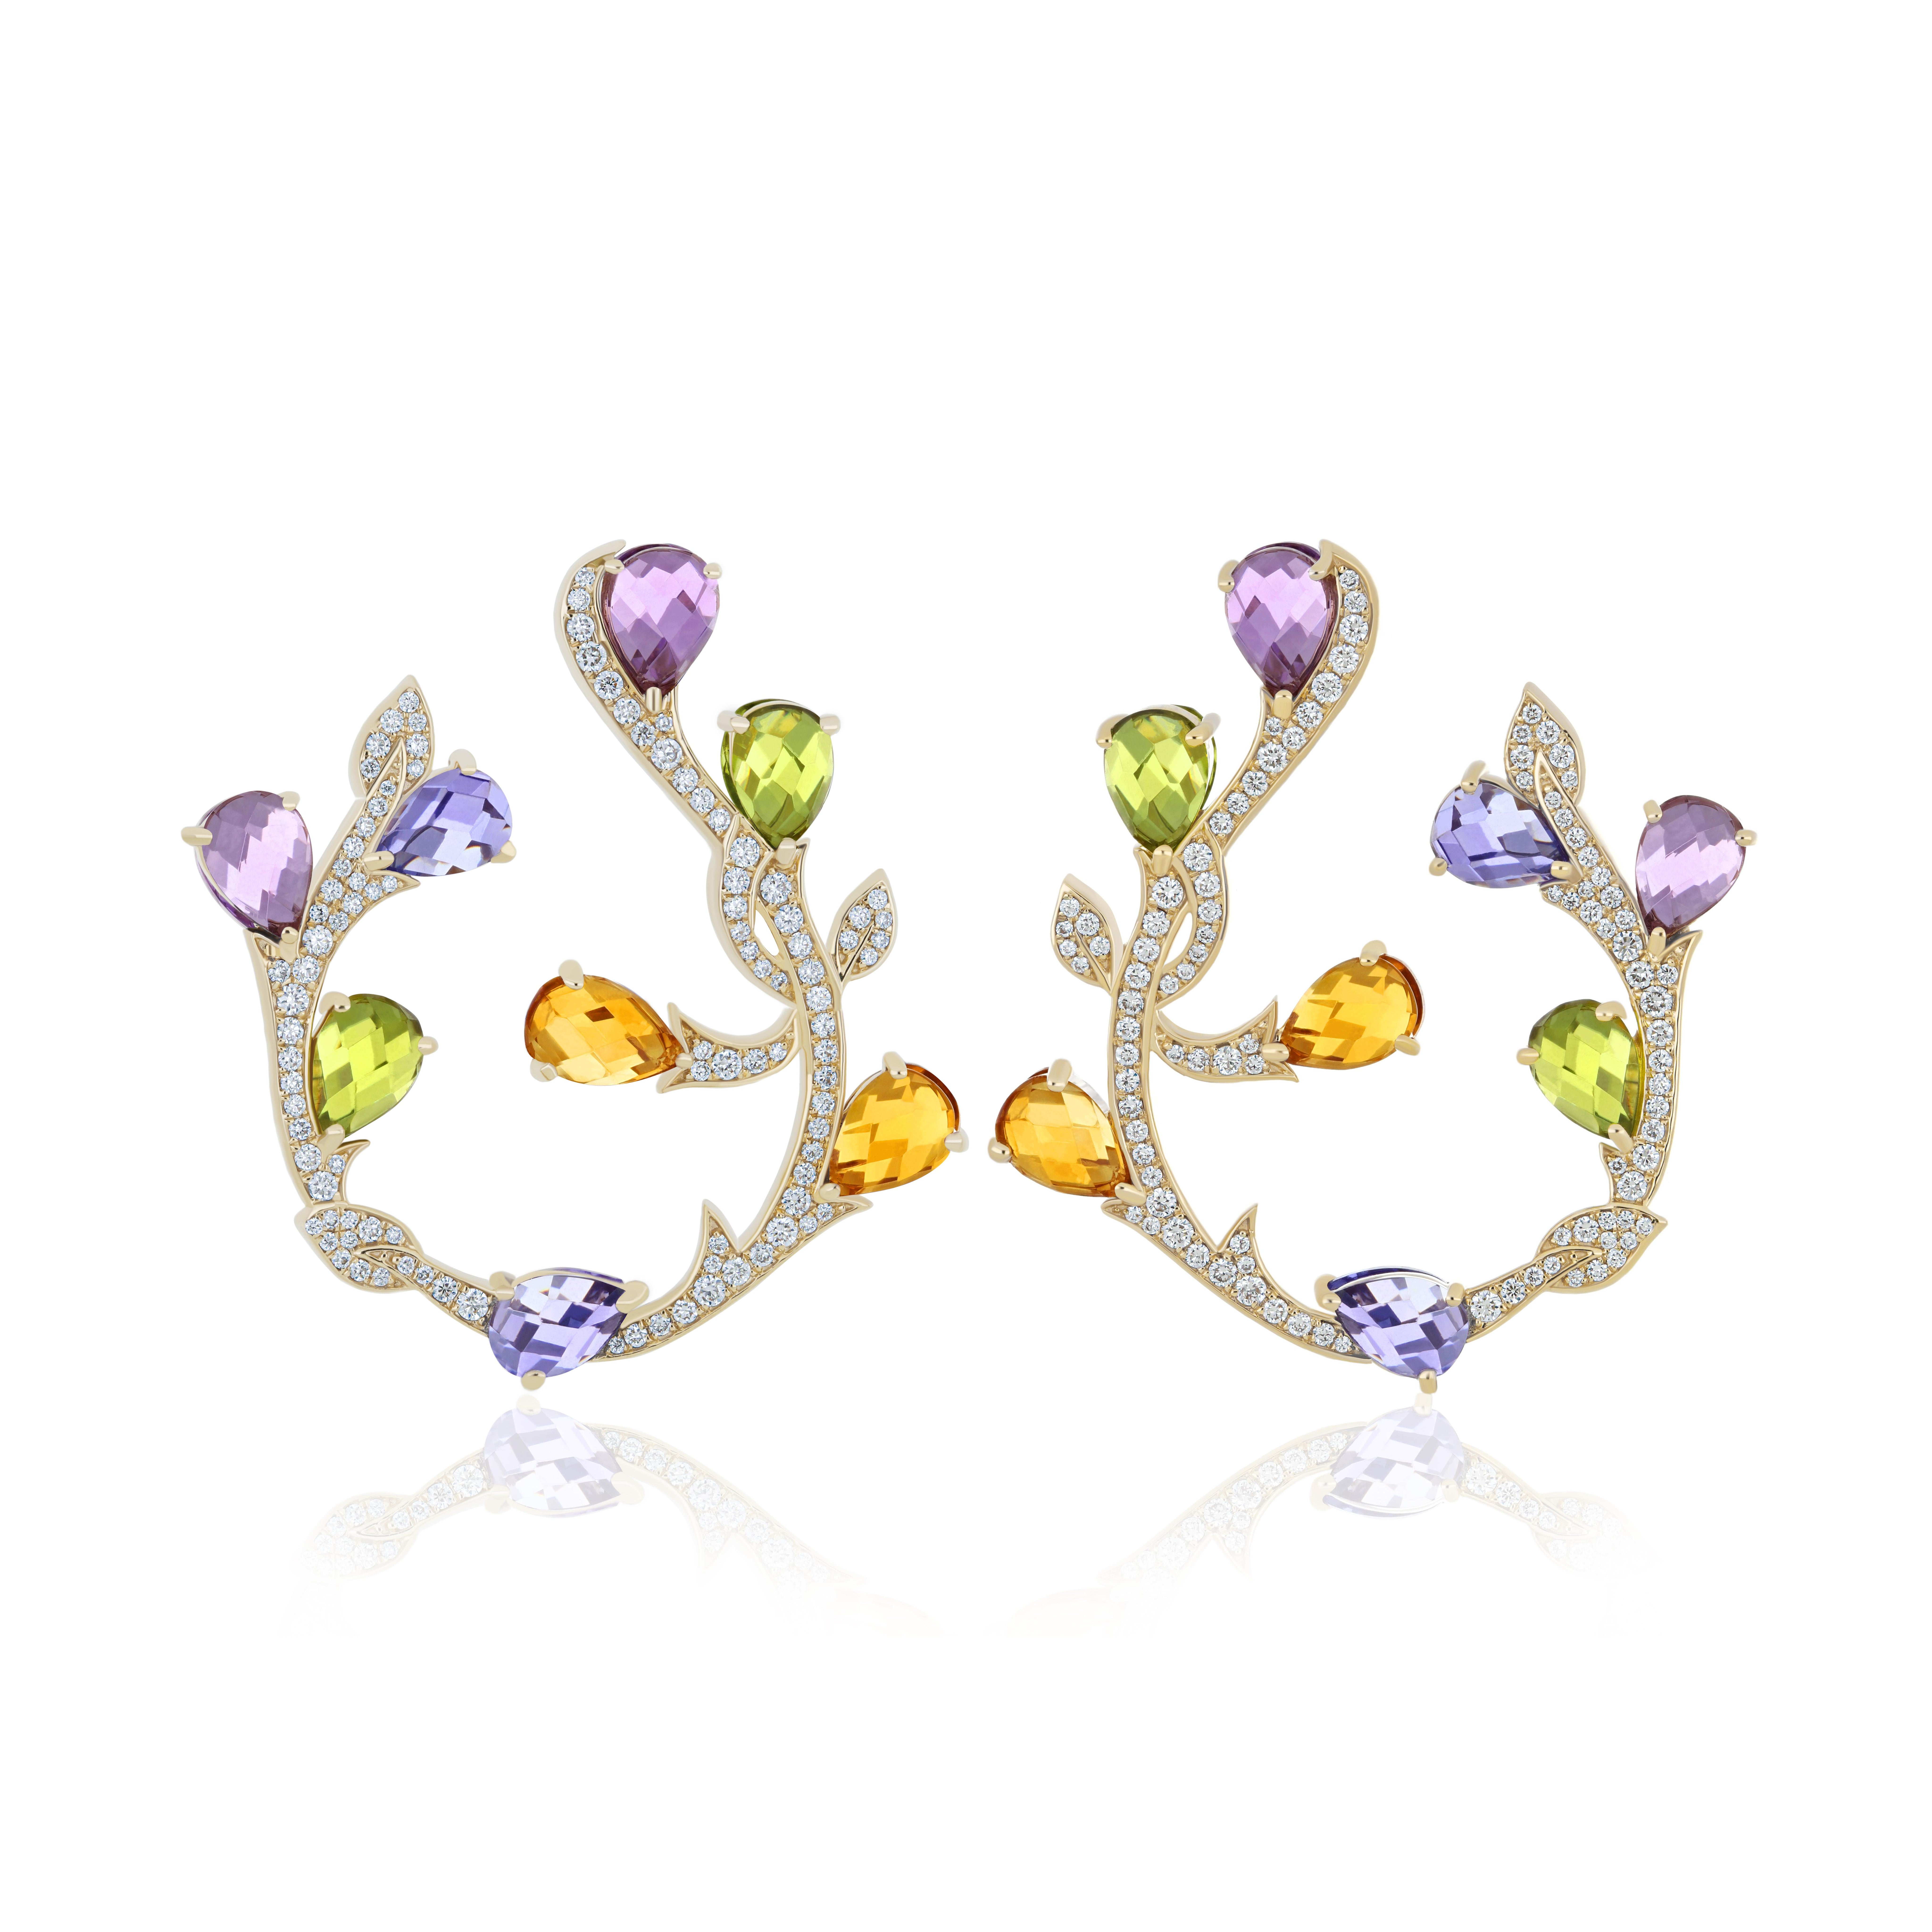 Women's Multi Color Gemstones and Dimaond Studded Earrings in 14K Yellow Gold For Sale